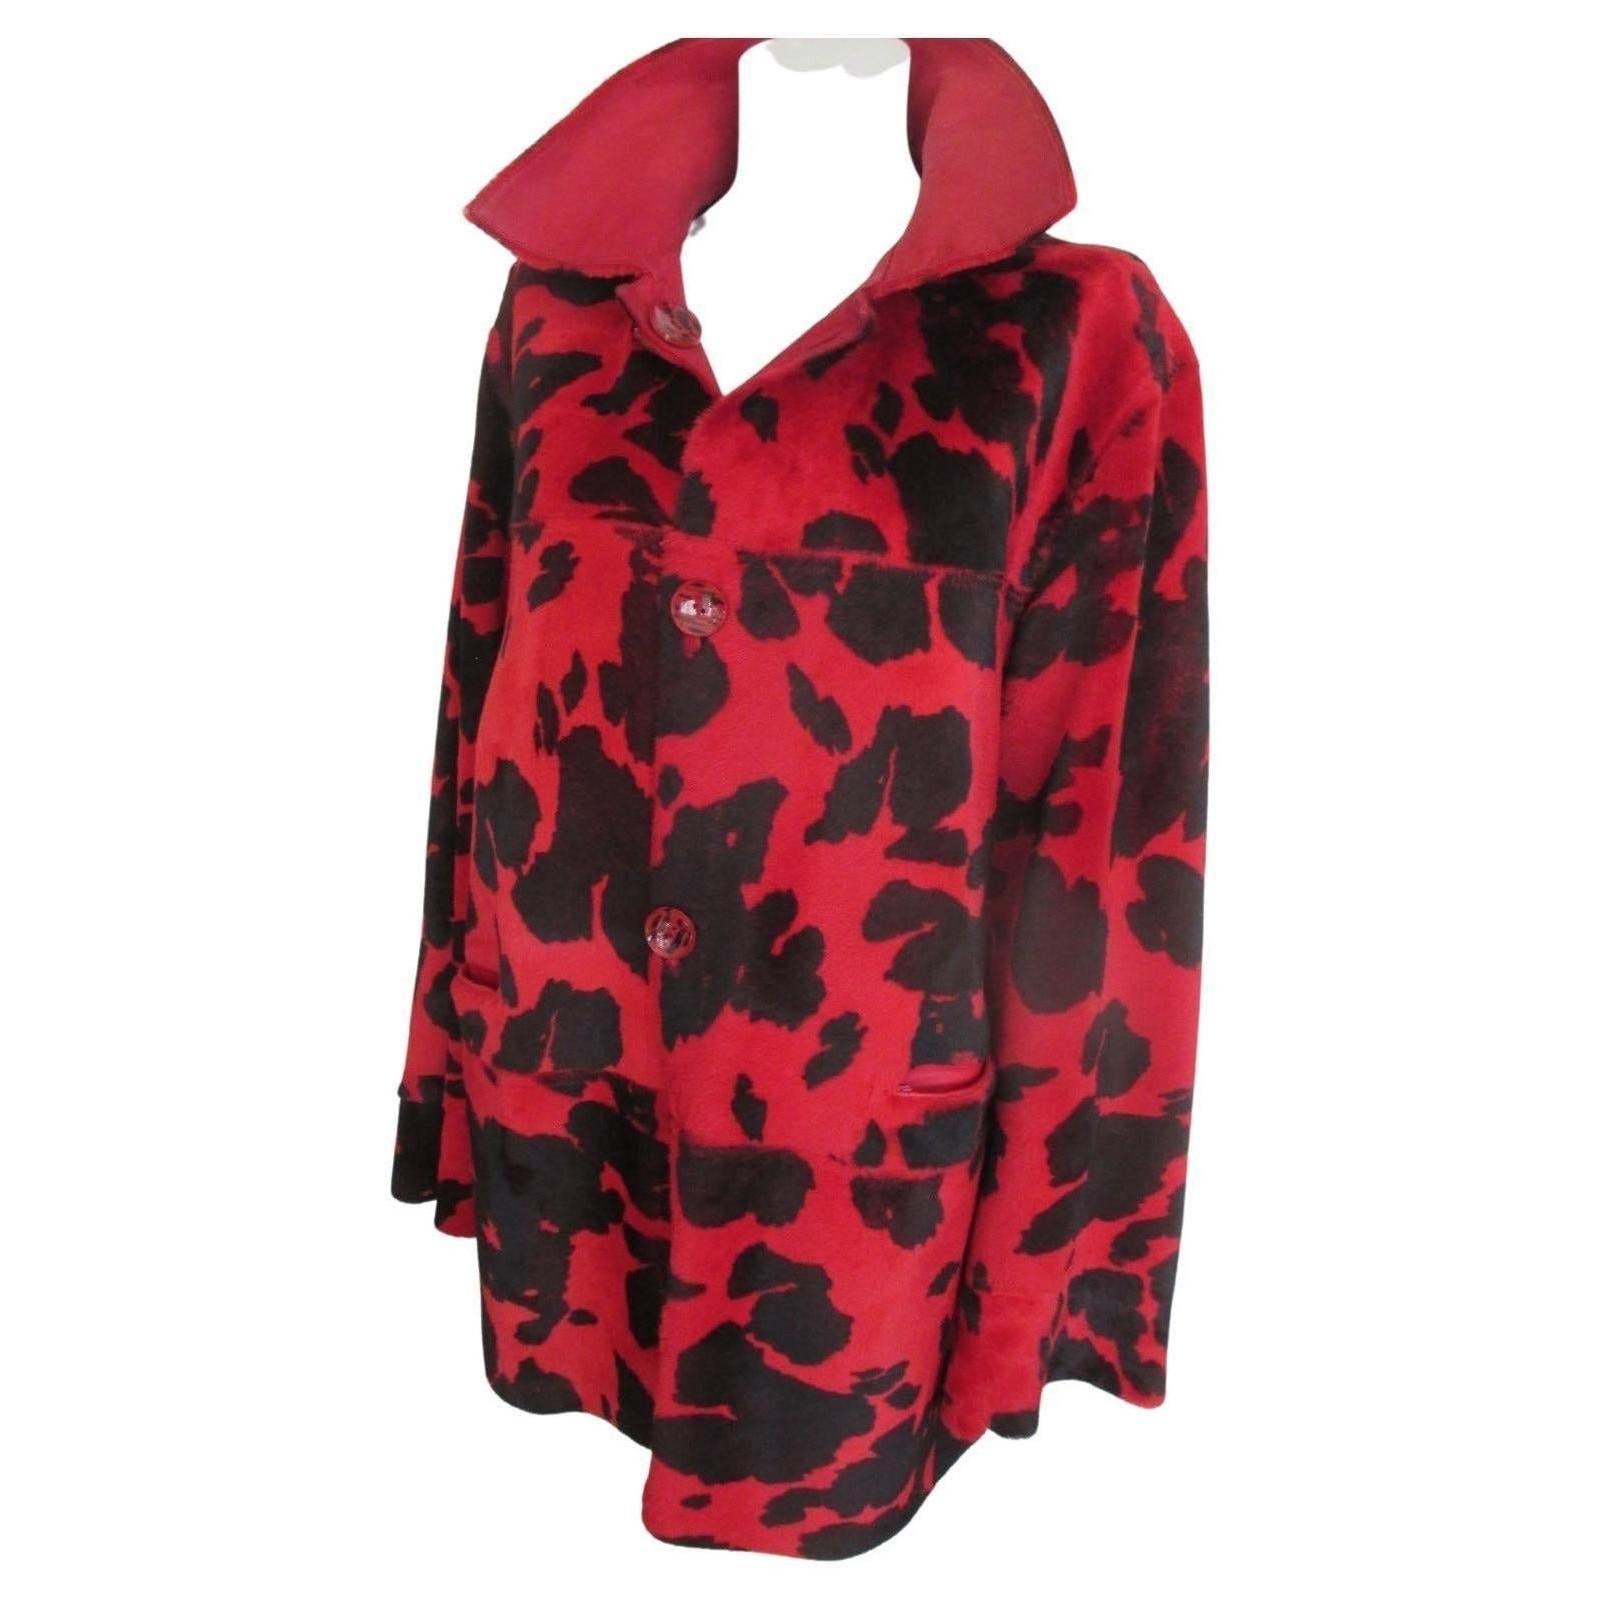 Red Animal Printed Lambskin Leather Coat Reversible For Sale